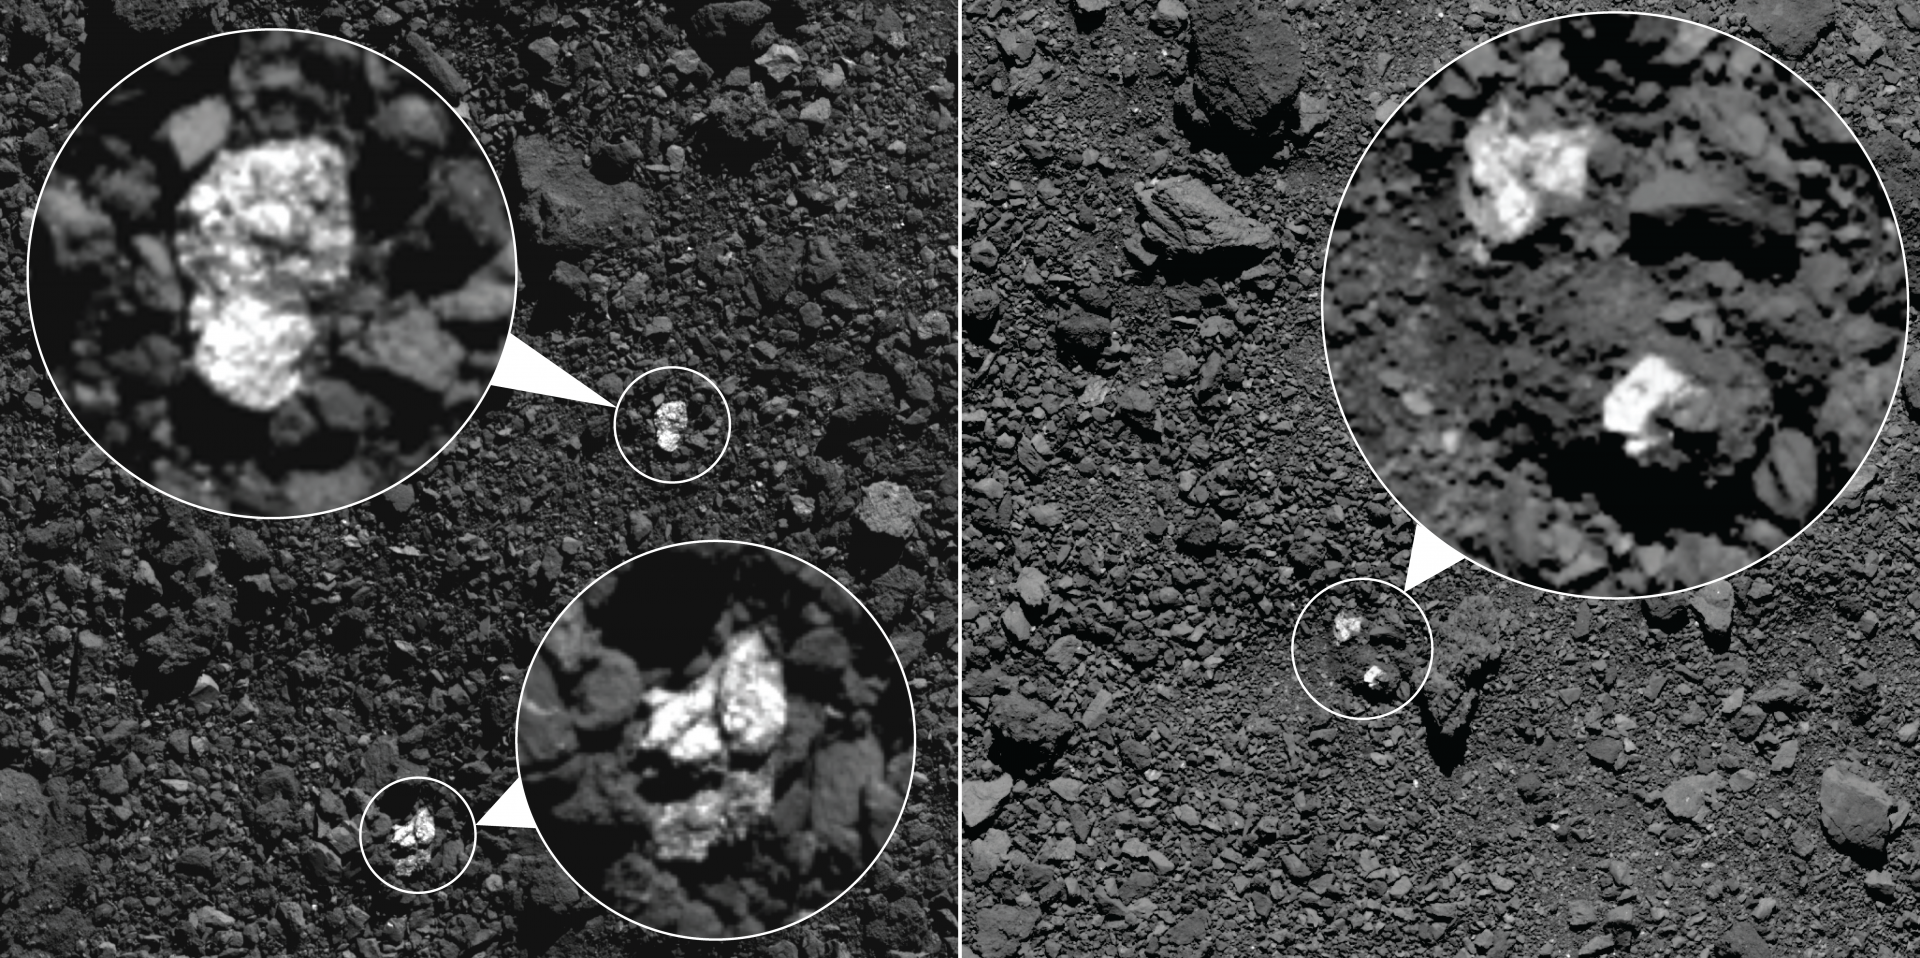 During spring 2019, NASA’s OSIRIS-REx spacecraft captured these images, which show fragments of asteroid Vesta present on asteroid Bennu’s surface. The bright boulders (circled in the images) are pyroxene-rich material from Vesta. Some bright material appear to be individual rocks (left) while others appear to be clasts within larger boulders (right).NASA/Goddard/University of Arizona